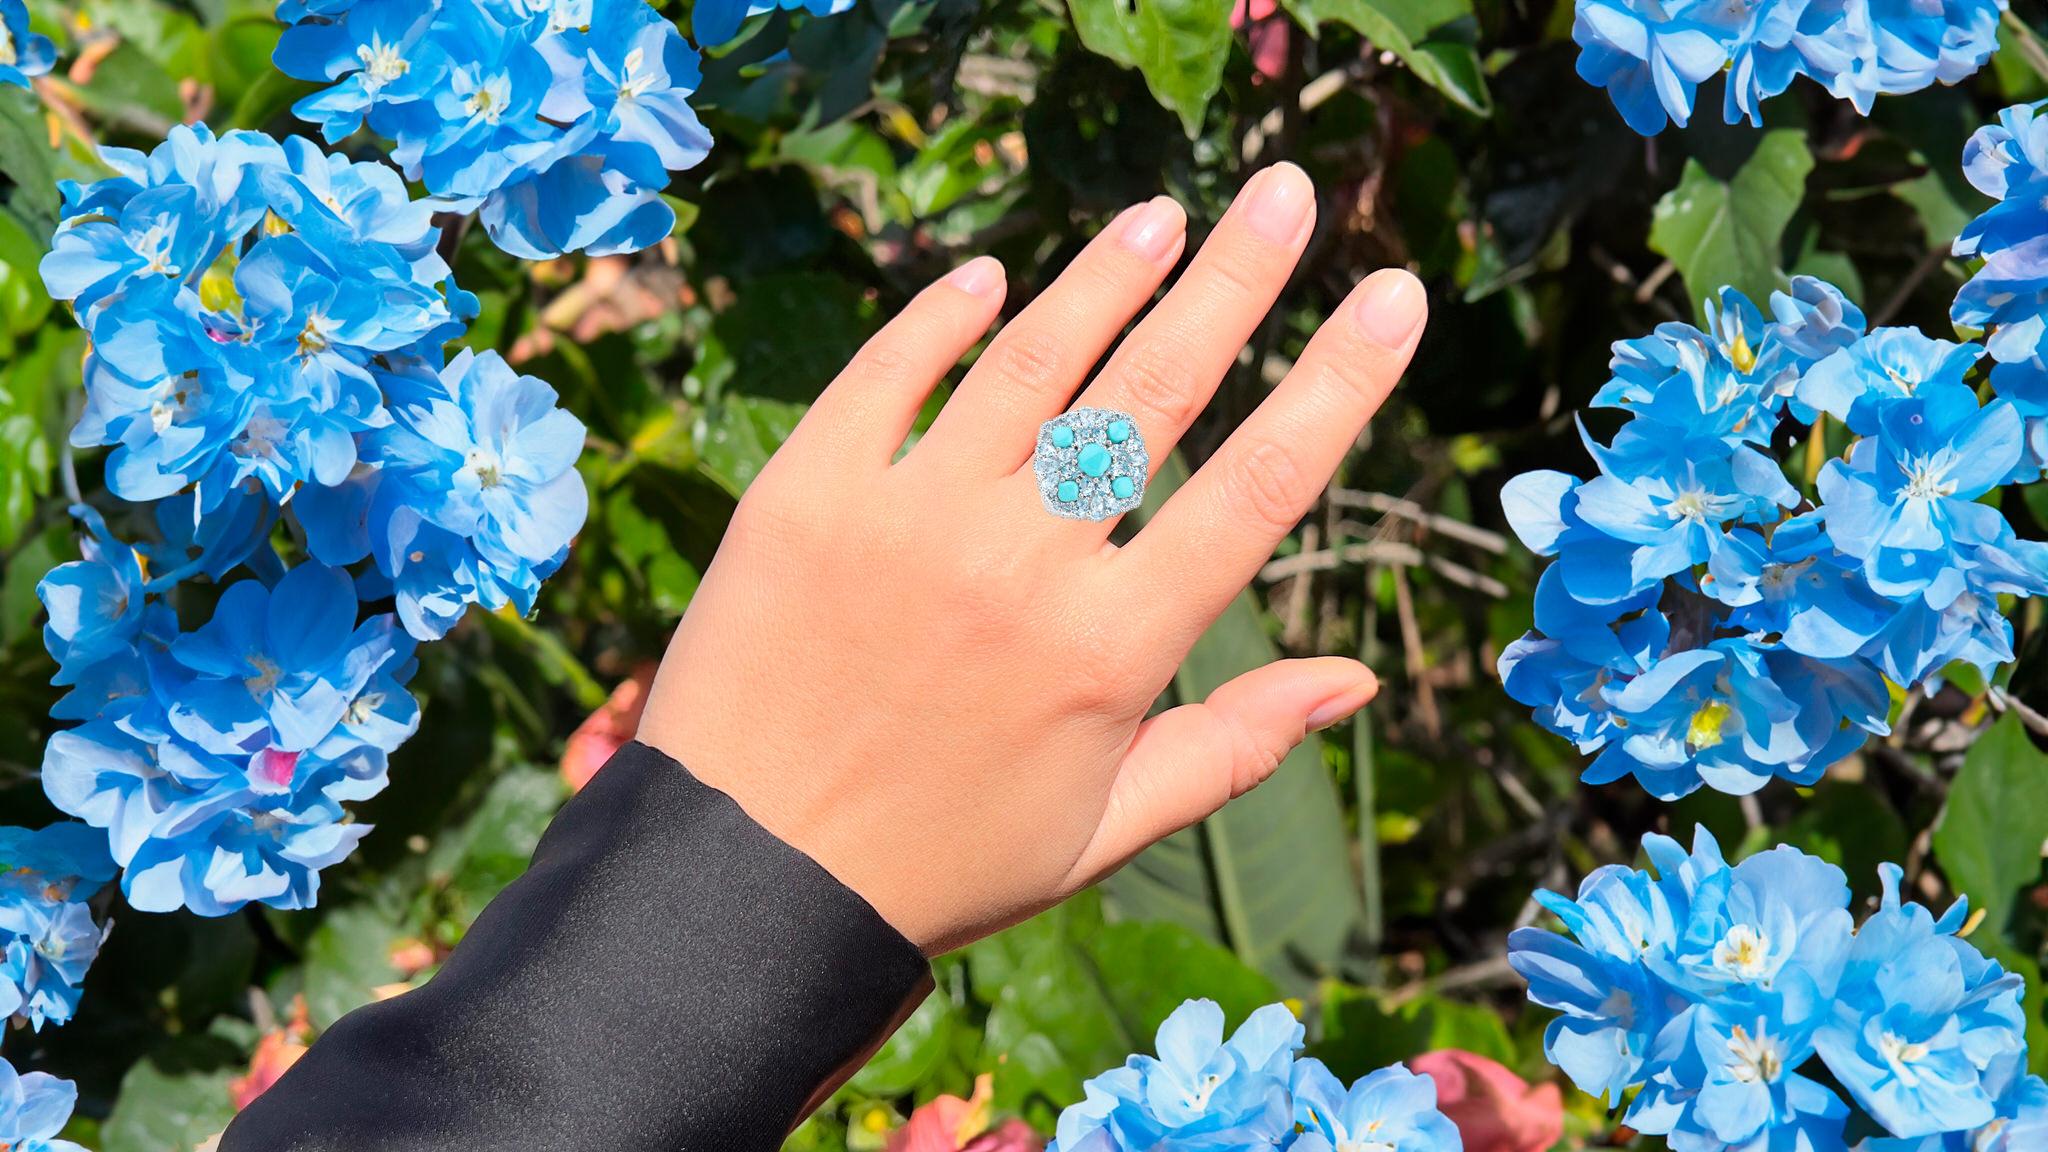 It comes with the Gemological Appraisal by GIA GG/AJP
All Gemstones are Natural
5 Turquoise = 1.90 Carats
32 Blue Topazes = 4.31 Carats
Metal: Rhodium Plated Sterling Silver
Ring Size: 7* US
*It can be resized complimentary